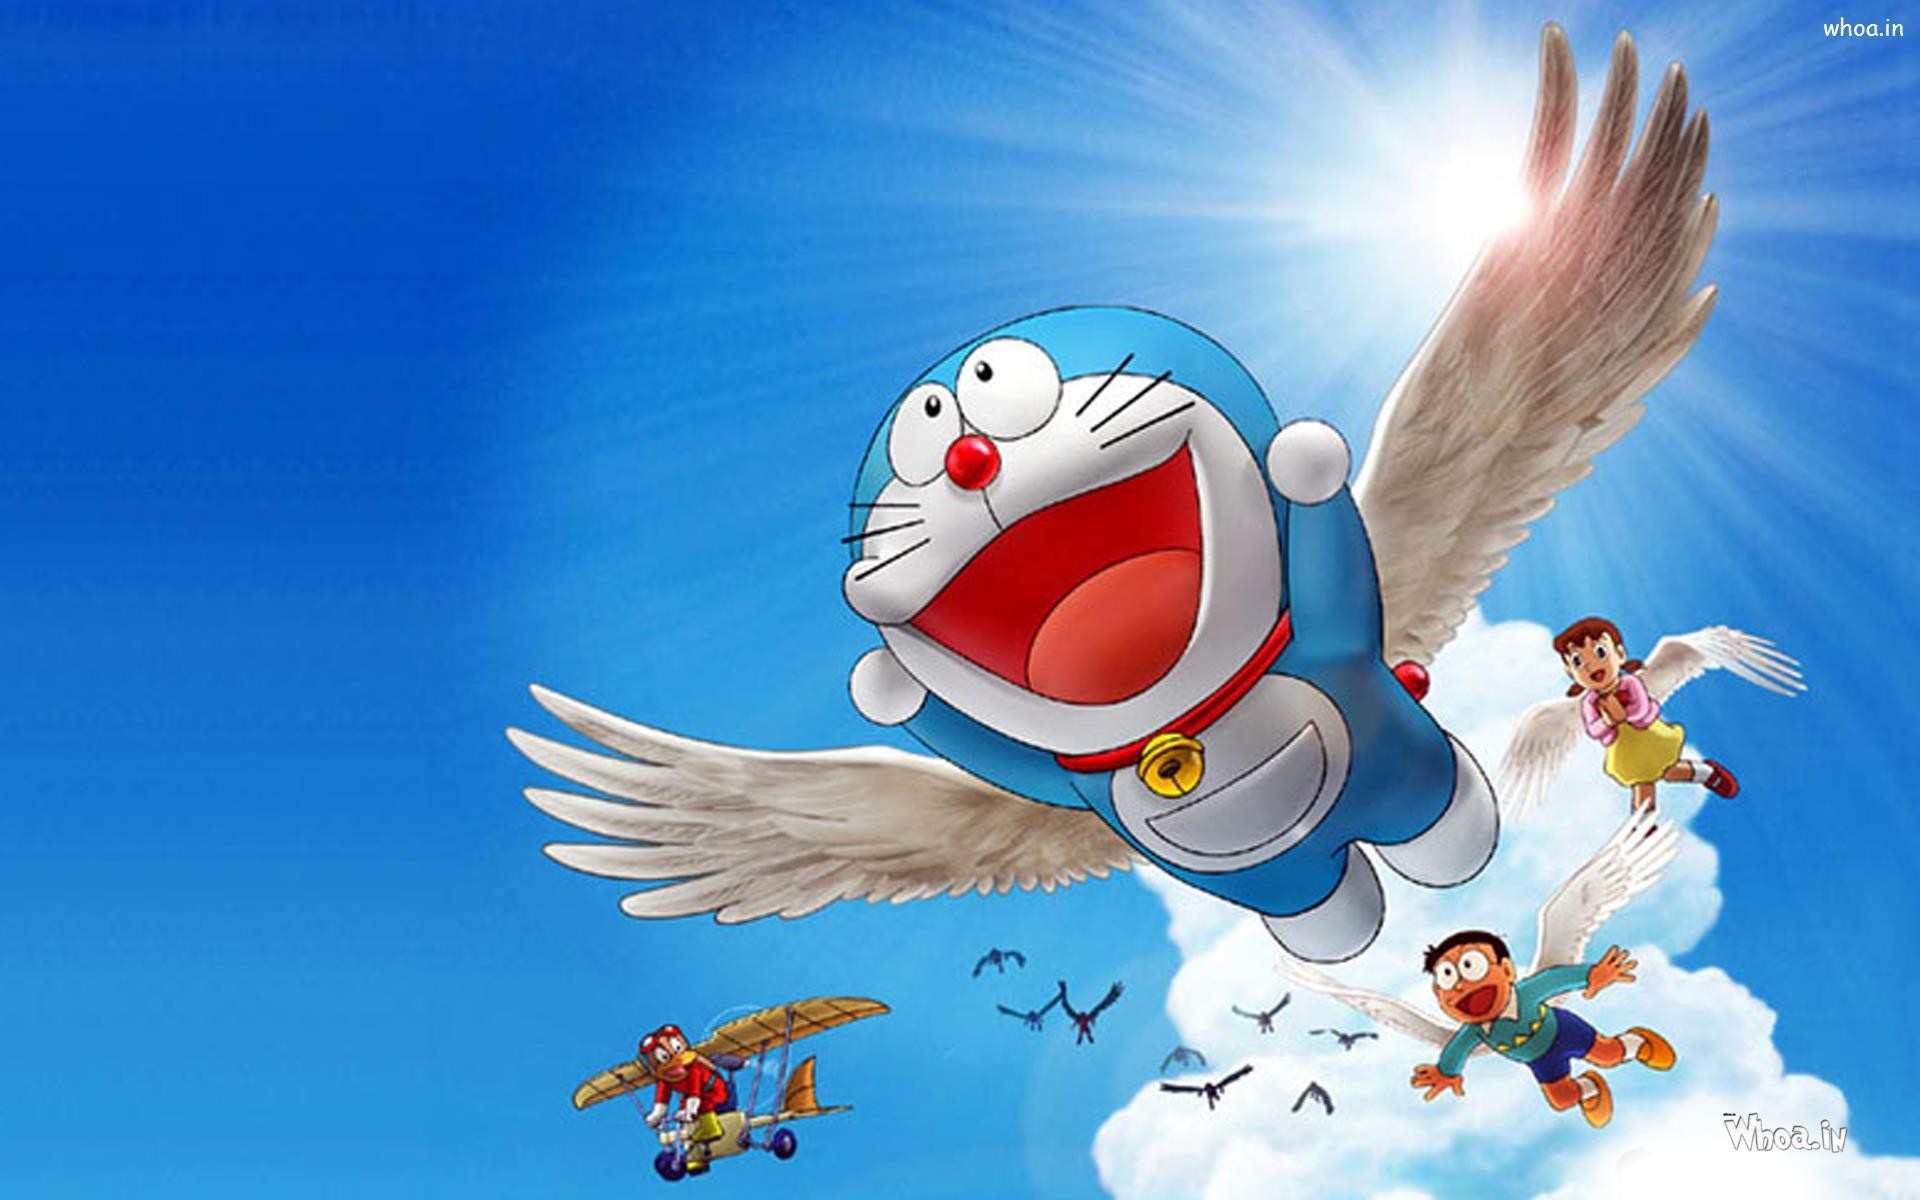 Stand By Me Doraemon Movie HD Widescreen Wallpaper Doraemon wallpaper HD  wallpaper  Wallpaperbetter